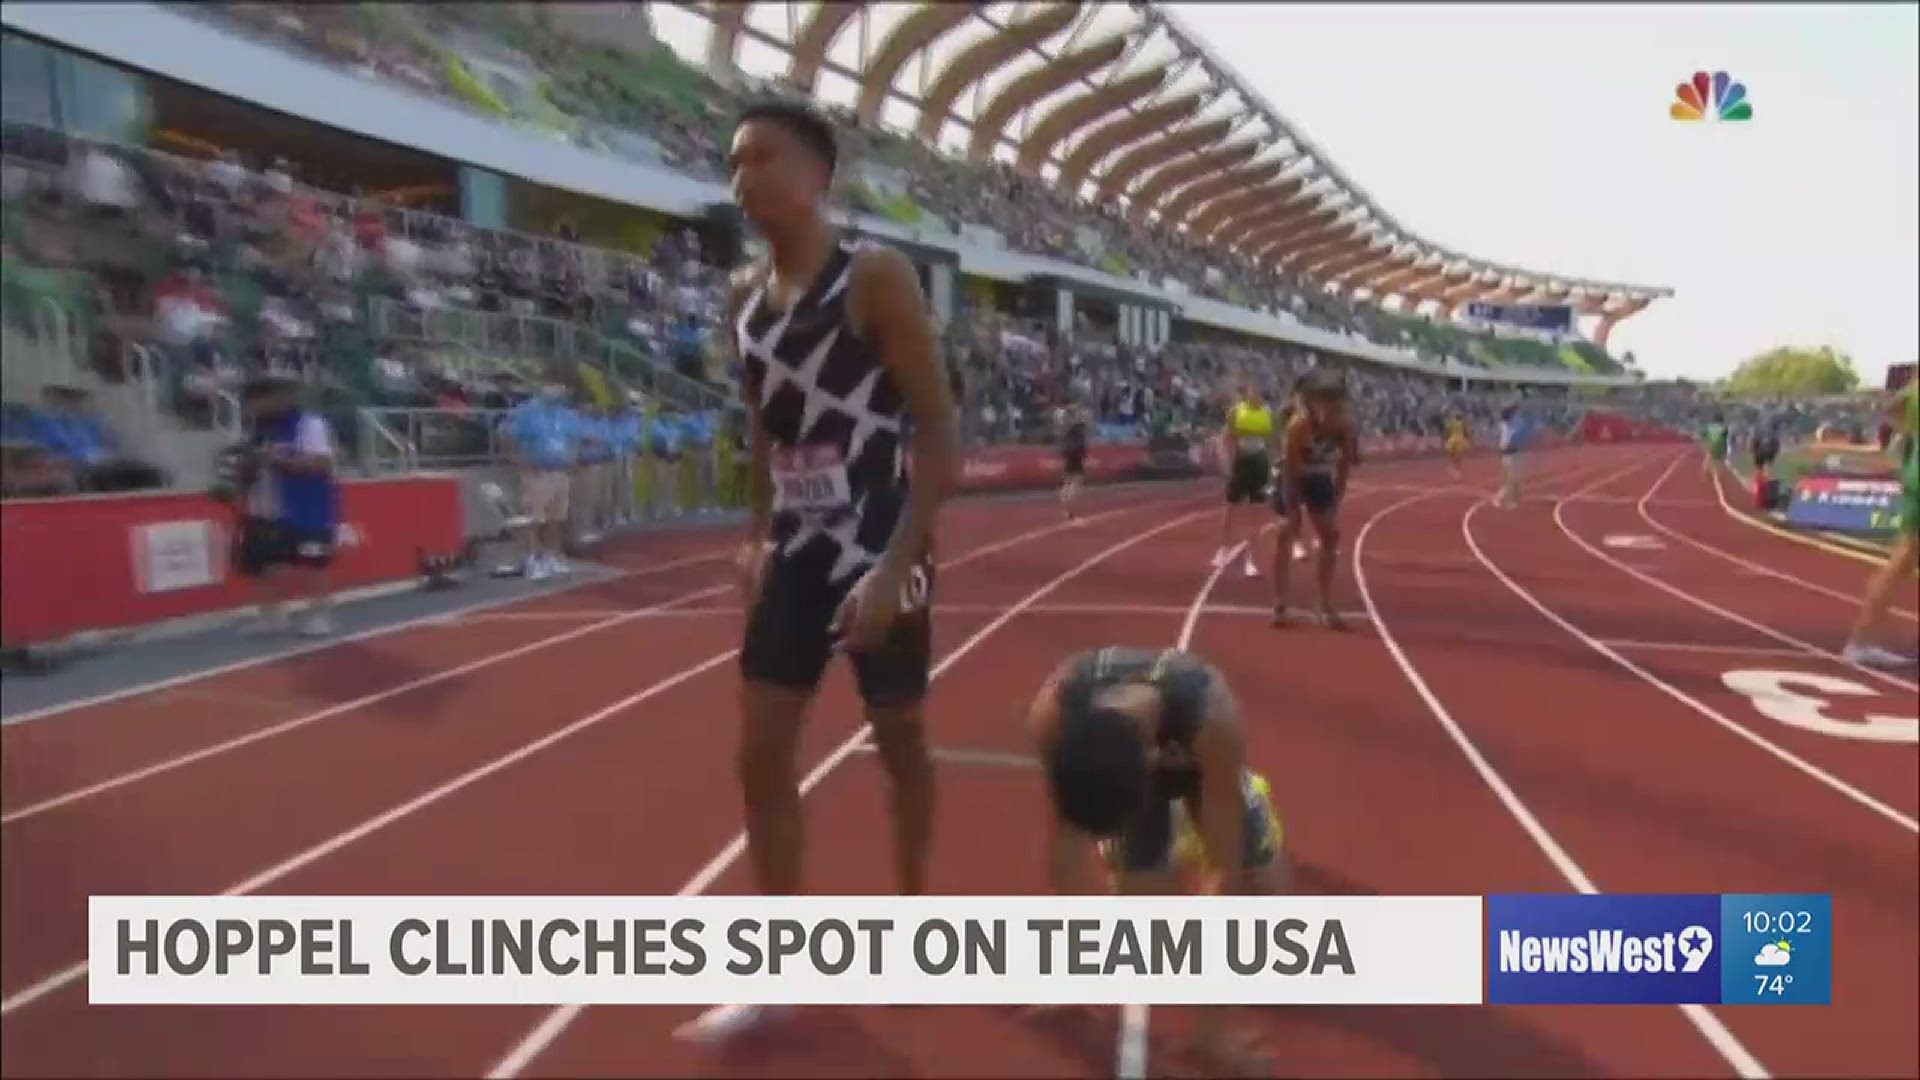 Midland High grad Bryce Hoppel finished 3rd in the 800 meter run at the Olympic trials, solidifying his spot on the USA national team